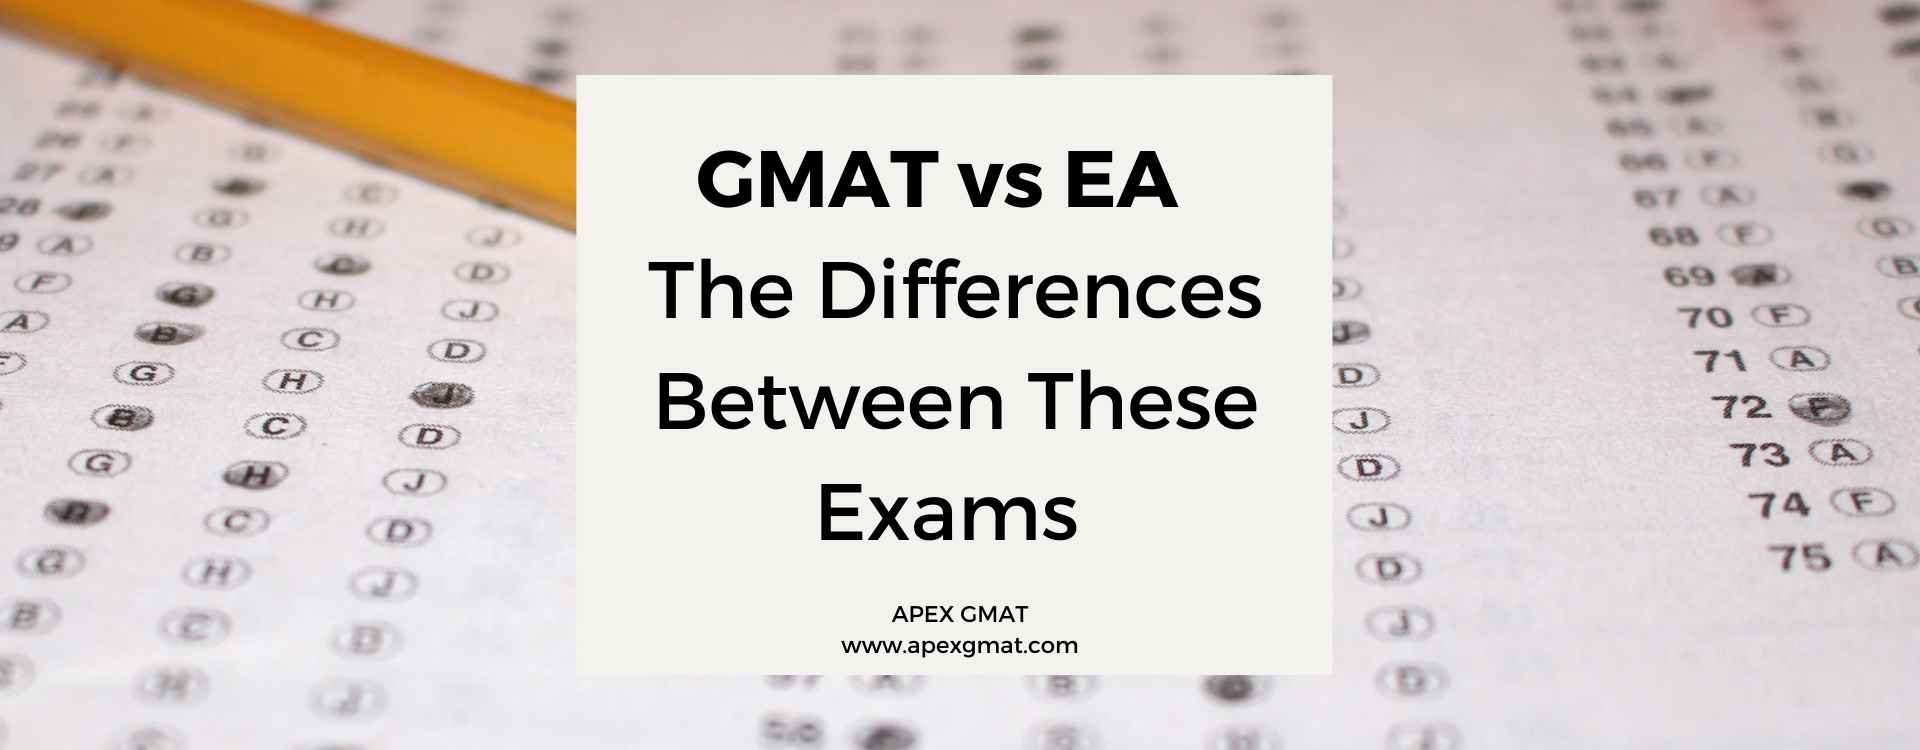 GMAT vs EA – The Differences Between These Exams